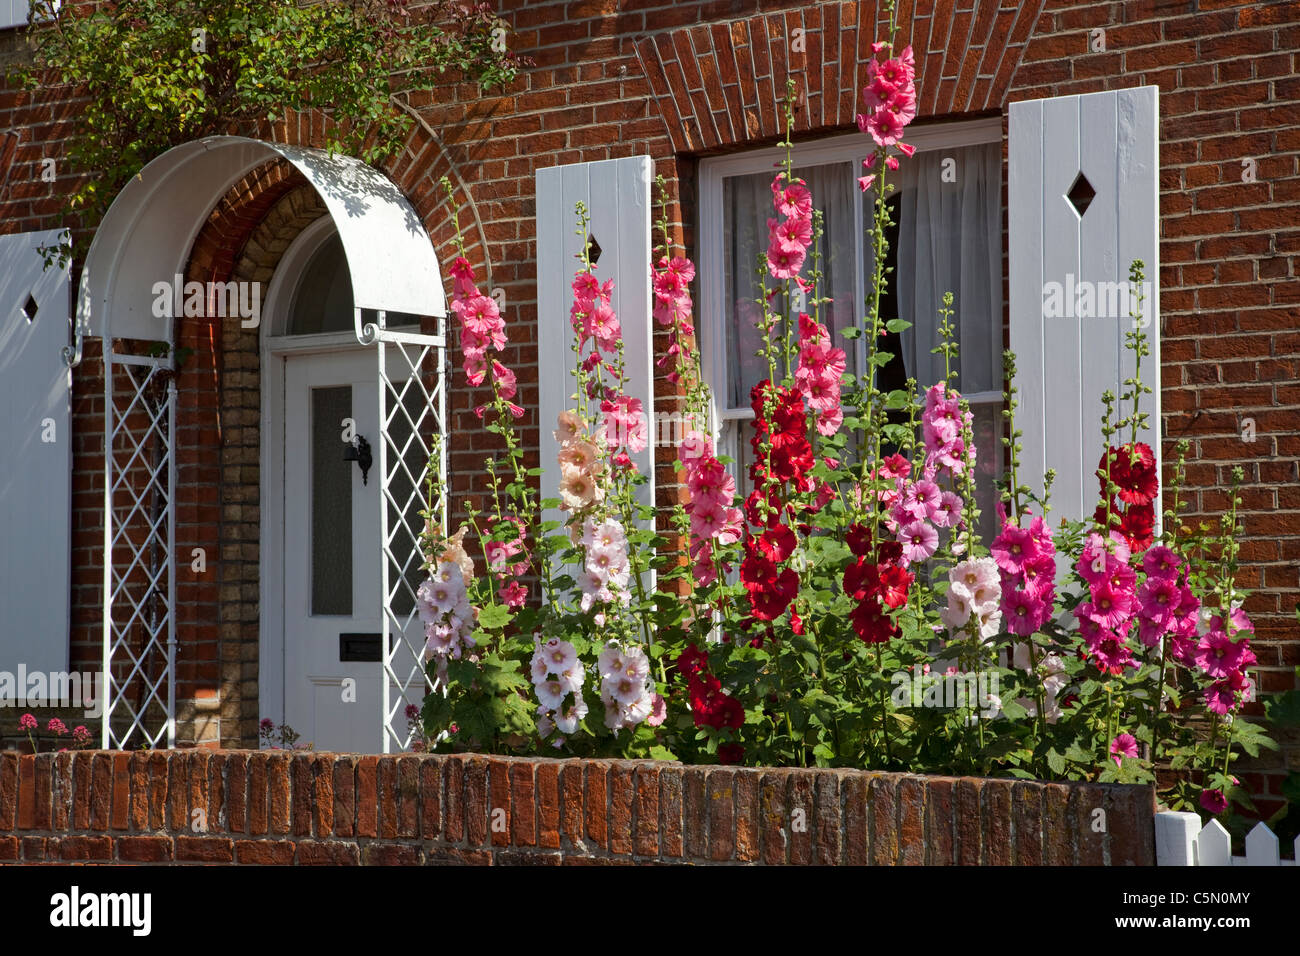 Front of english cottage with white metal porch, wooden window shutters and Hollyhocks in full bloom in garden Stock Photo